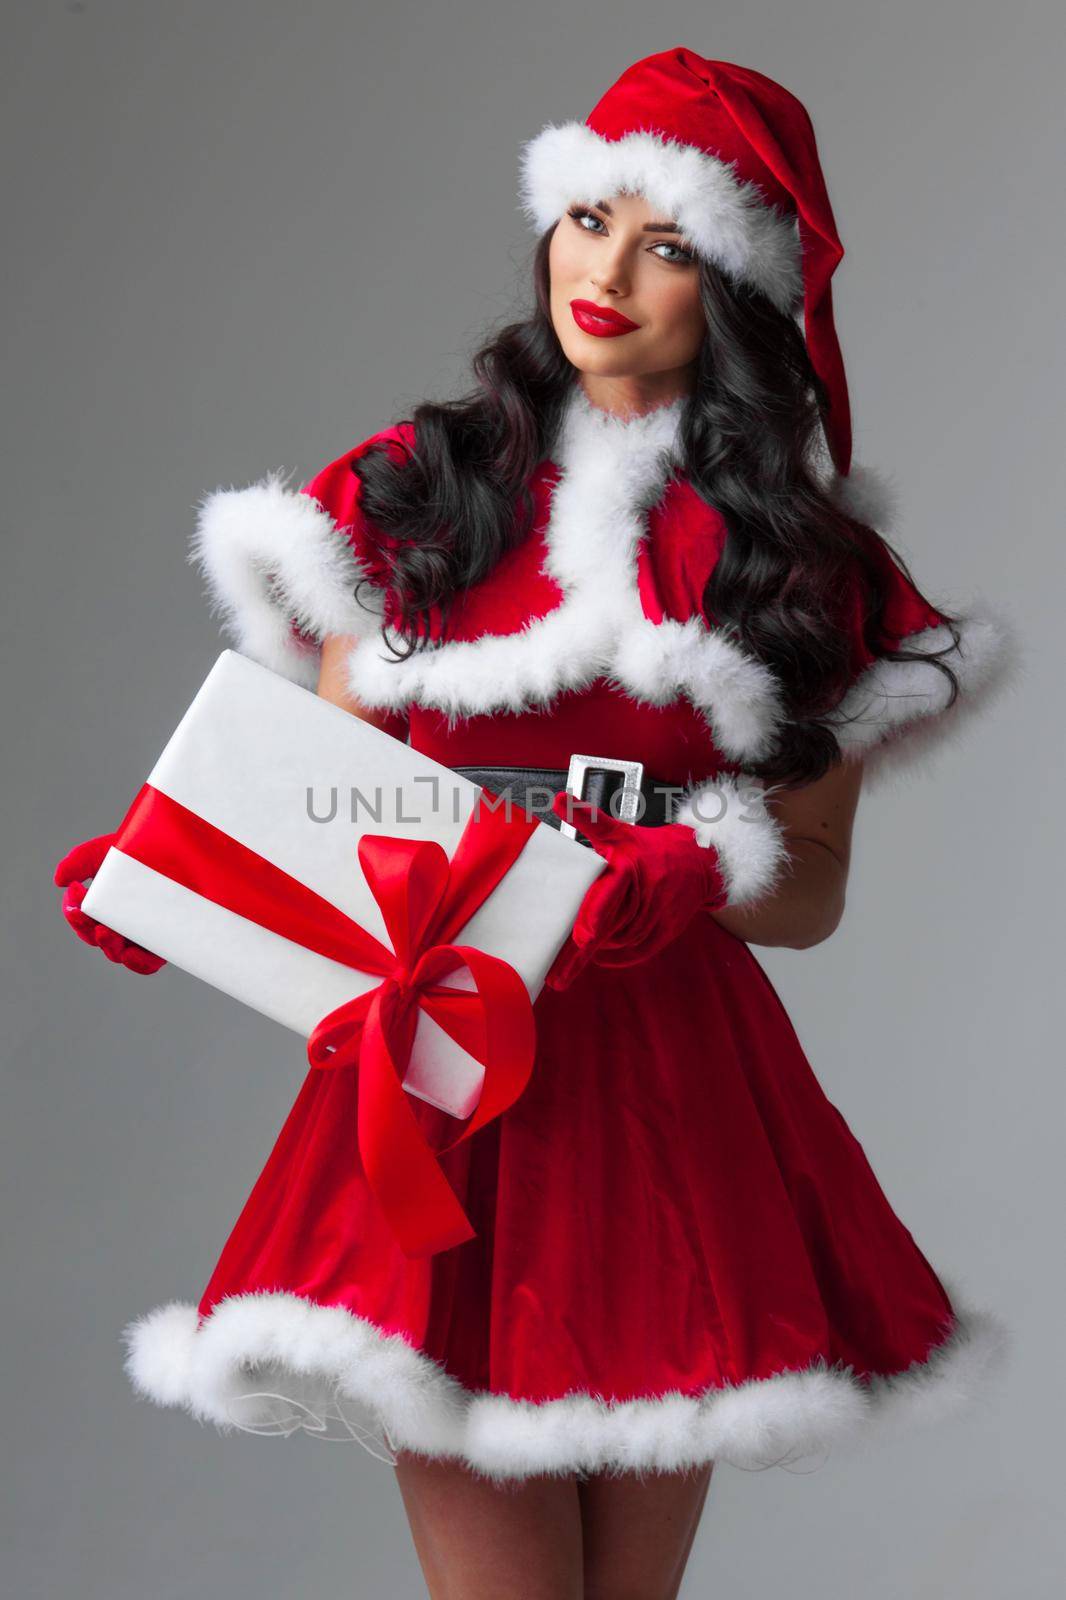 Beautiful young woman Santa Claus helper in red dress and hat holding gift box, white background, merry christmas happy holidays